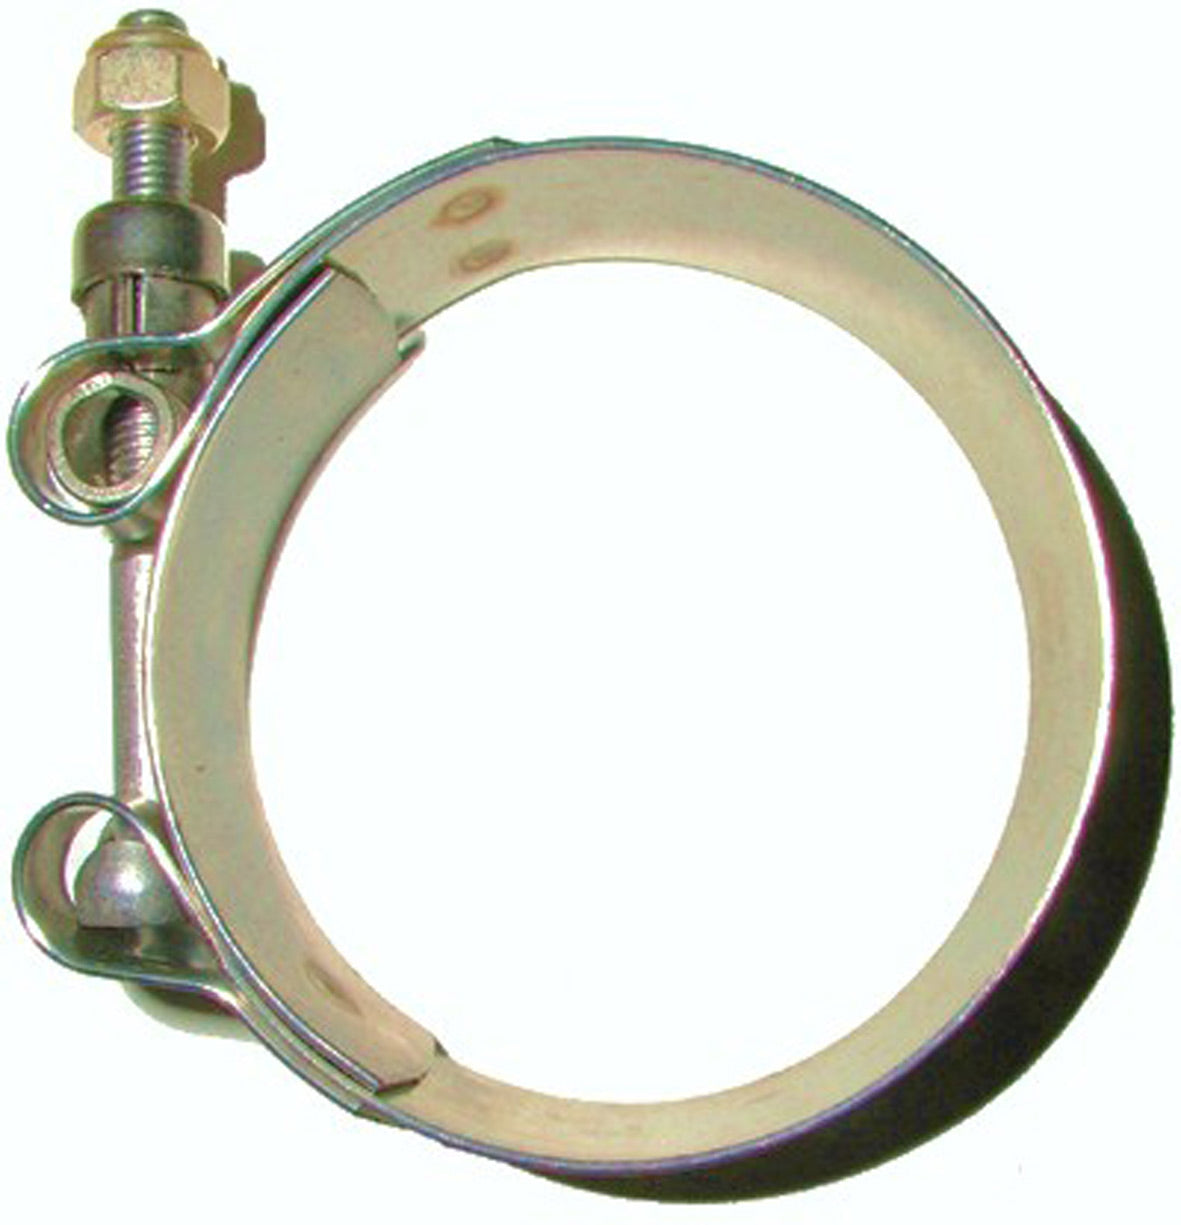 Stainless steel exhaust pipe clamp for 44 to 47mm pipes, side view